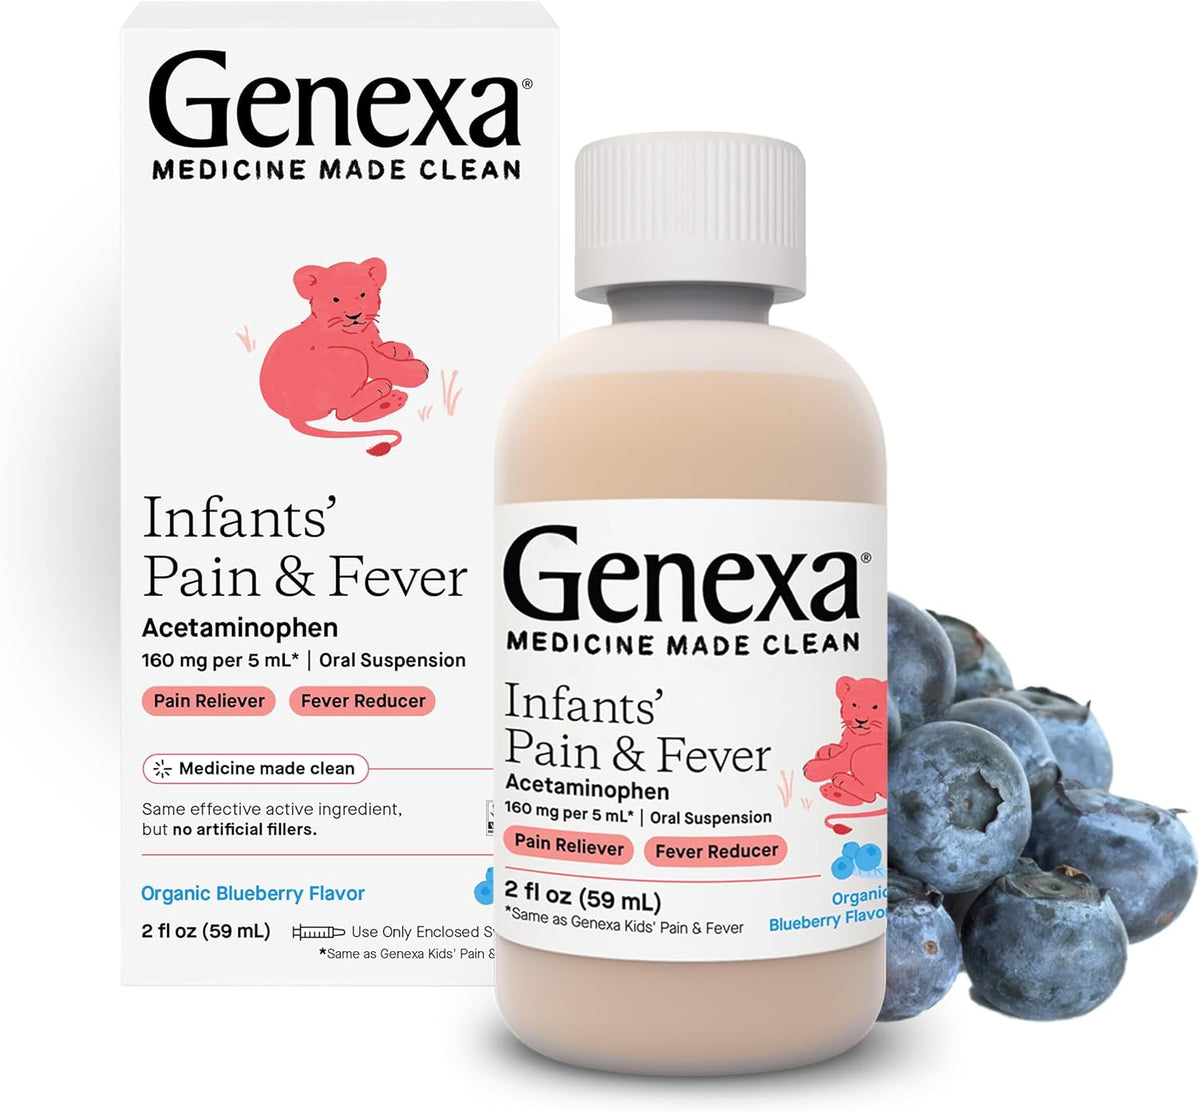 Genexa Infants’ Pain and Fever Reducer | Baby Acetaminophen, Dye Free, Liquid Oral Suspension Medicine for Infant | Delicious Organic Blueberry Flavor | 160 Mg per 5Ml | 2 Fluid Ounces